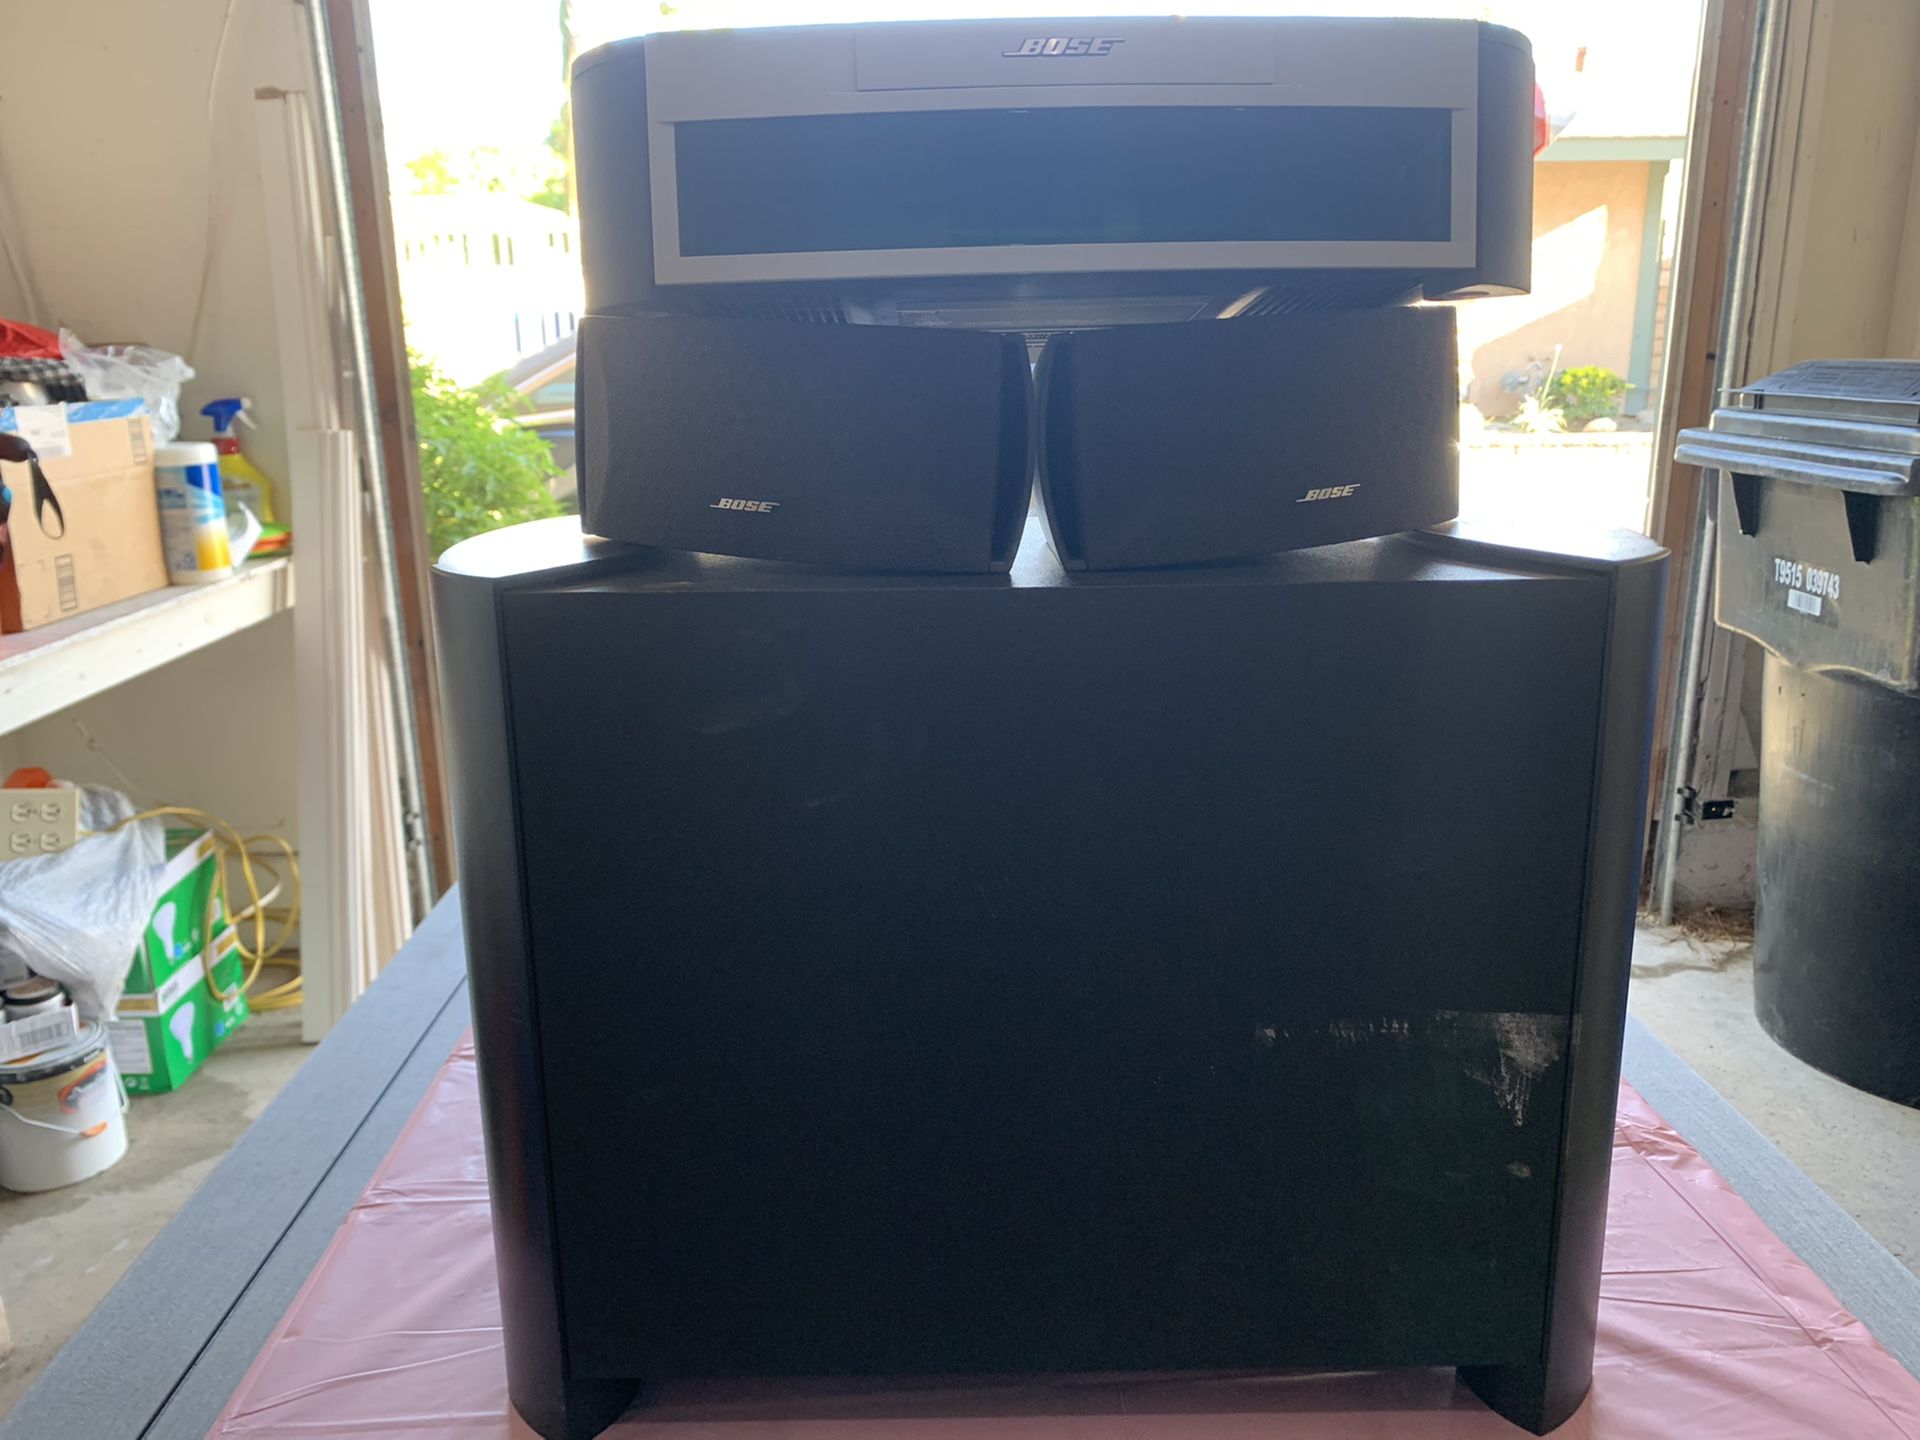 Bose 3-2-1 Home Theater Sound System w/ Sub and all cables.